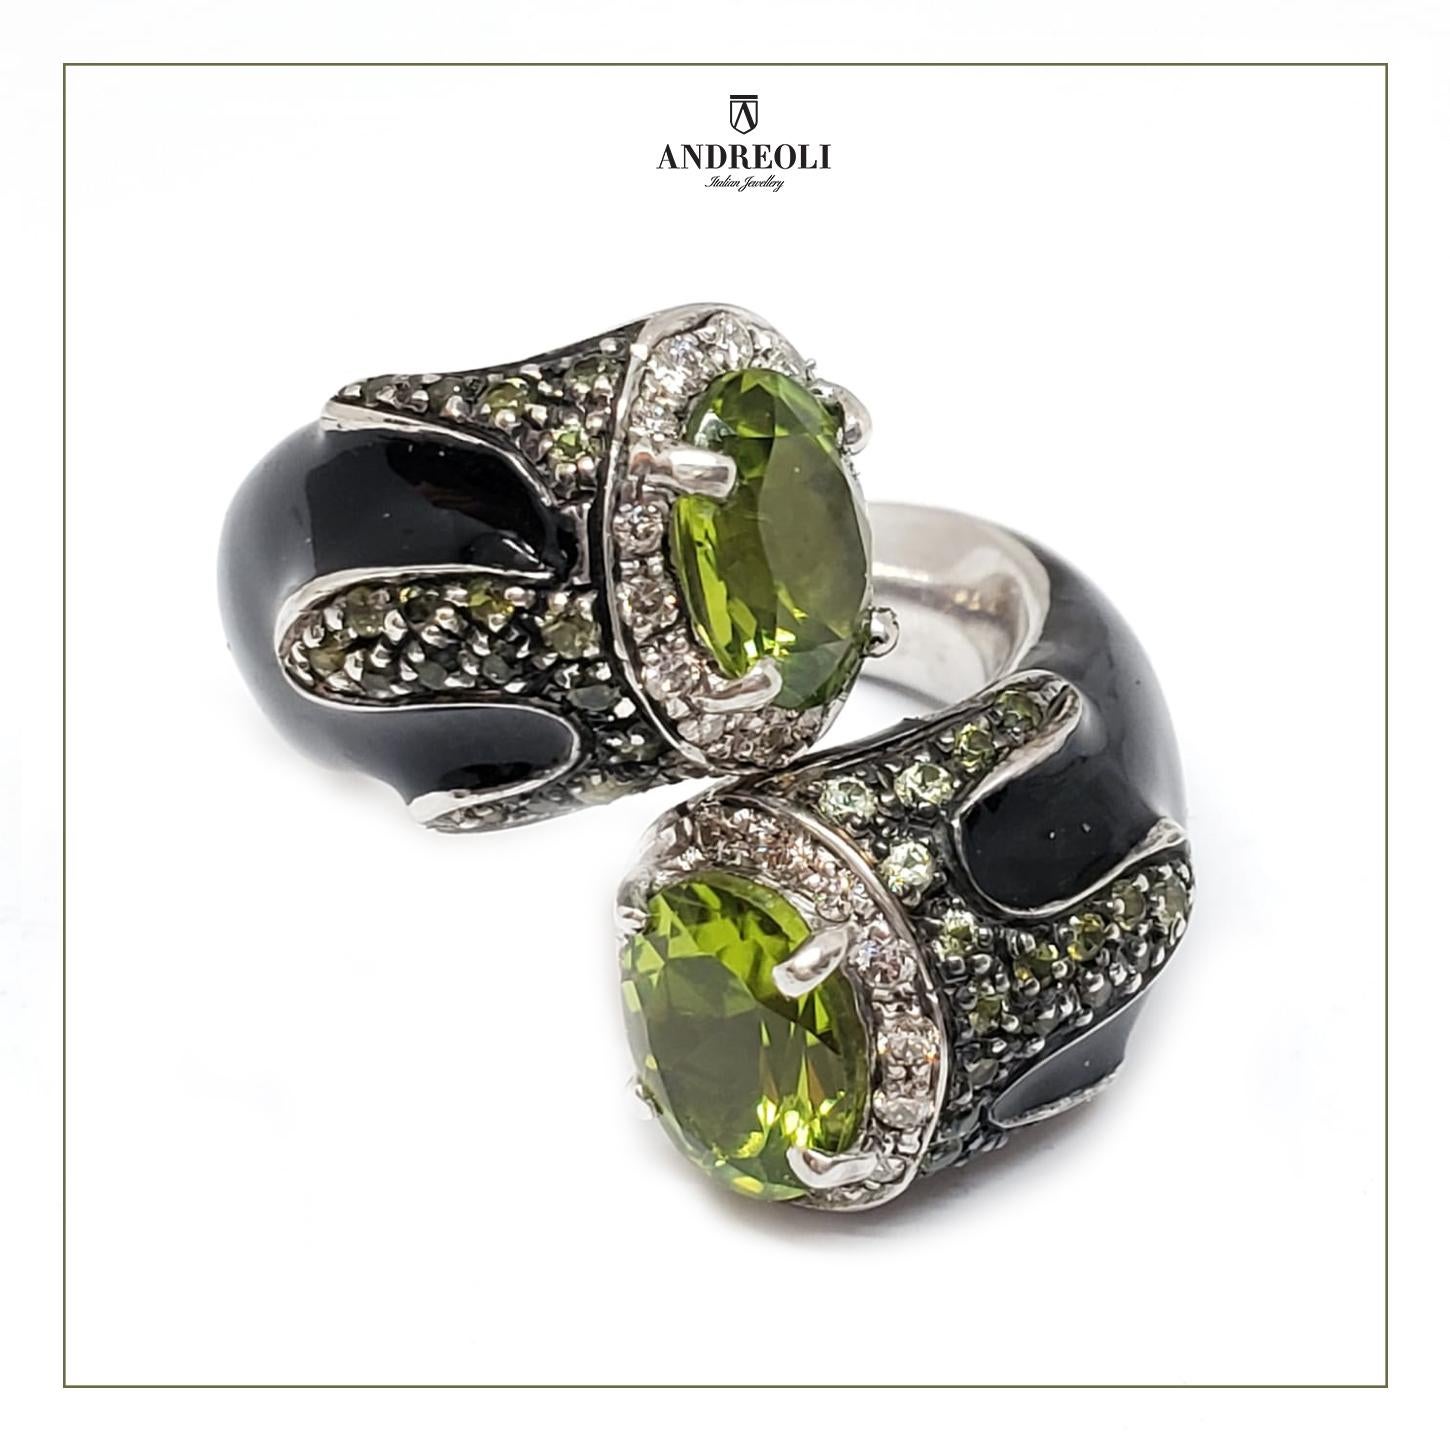 Contemporary Andreoli Black Enamel Peridot Diamond Bypass Cocktail Ring Silver 18 Karat Gold For Sale